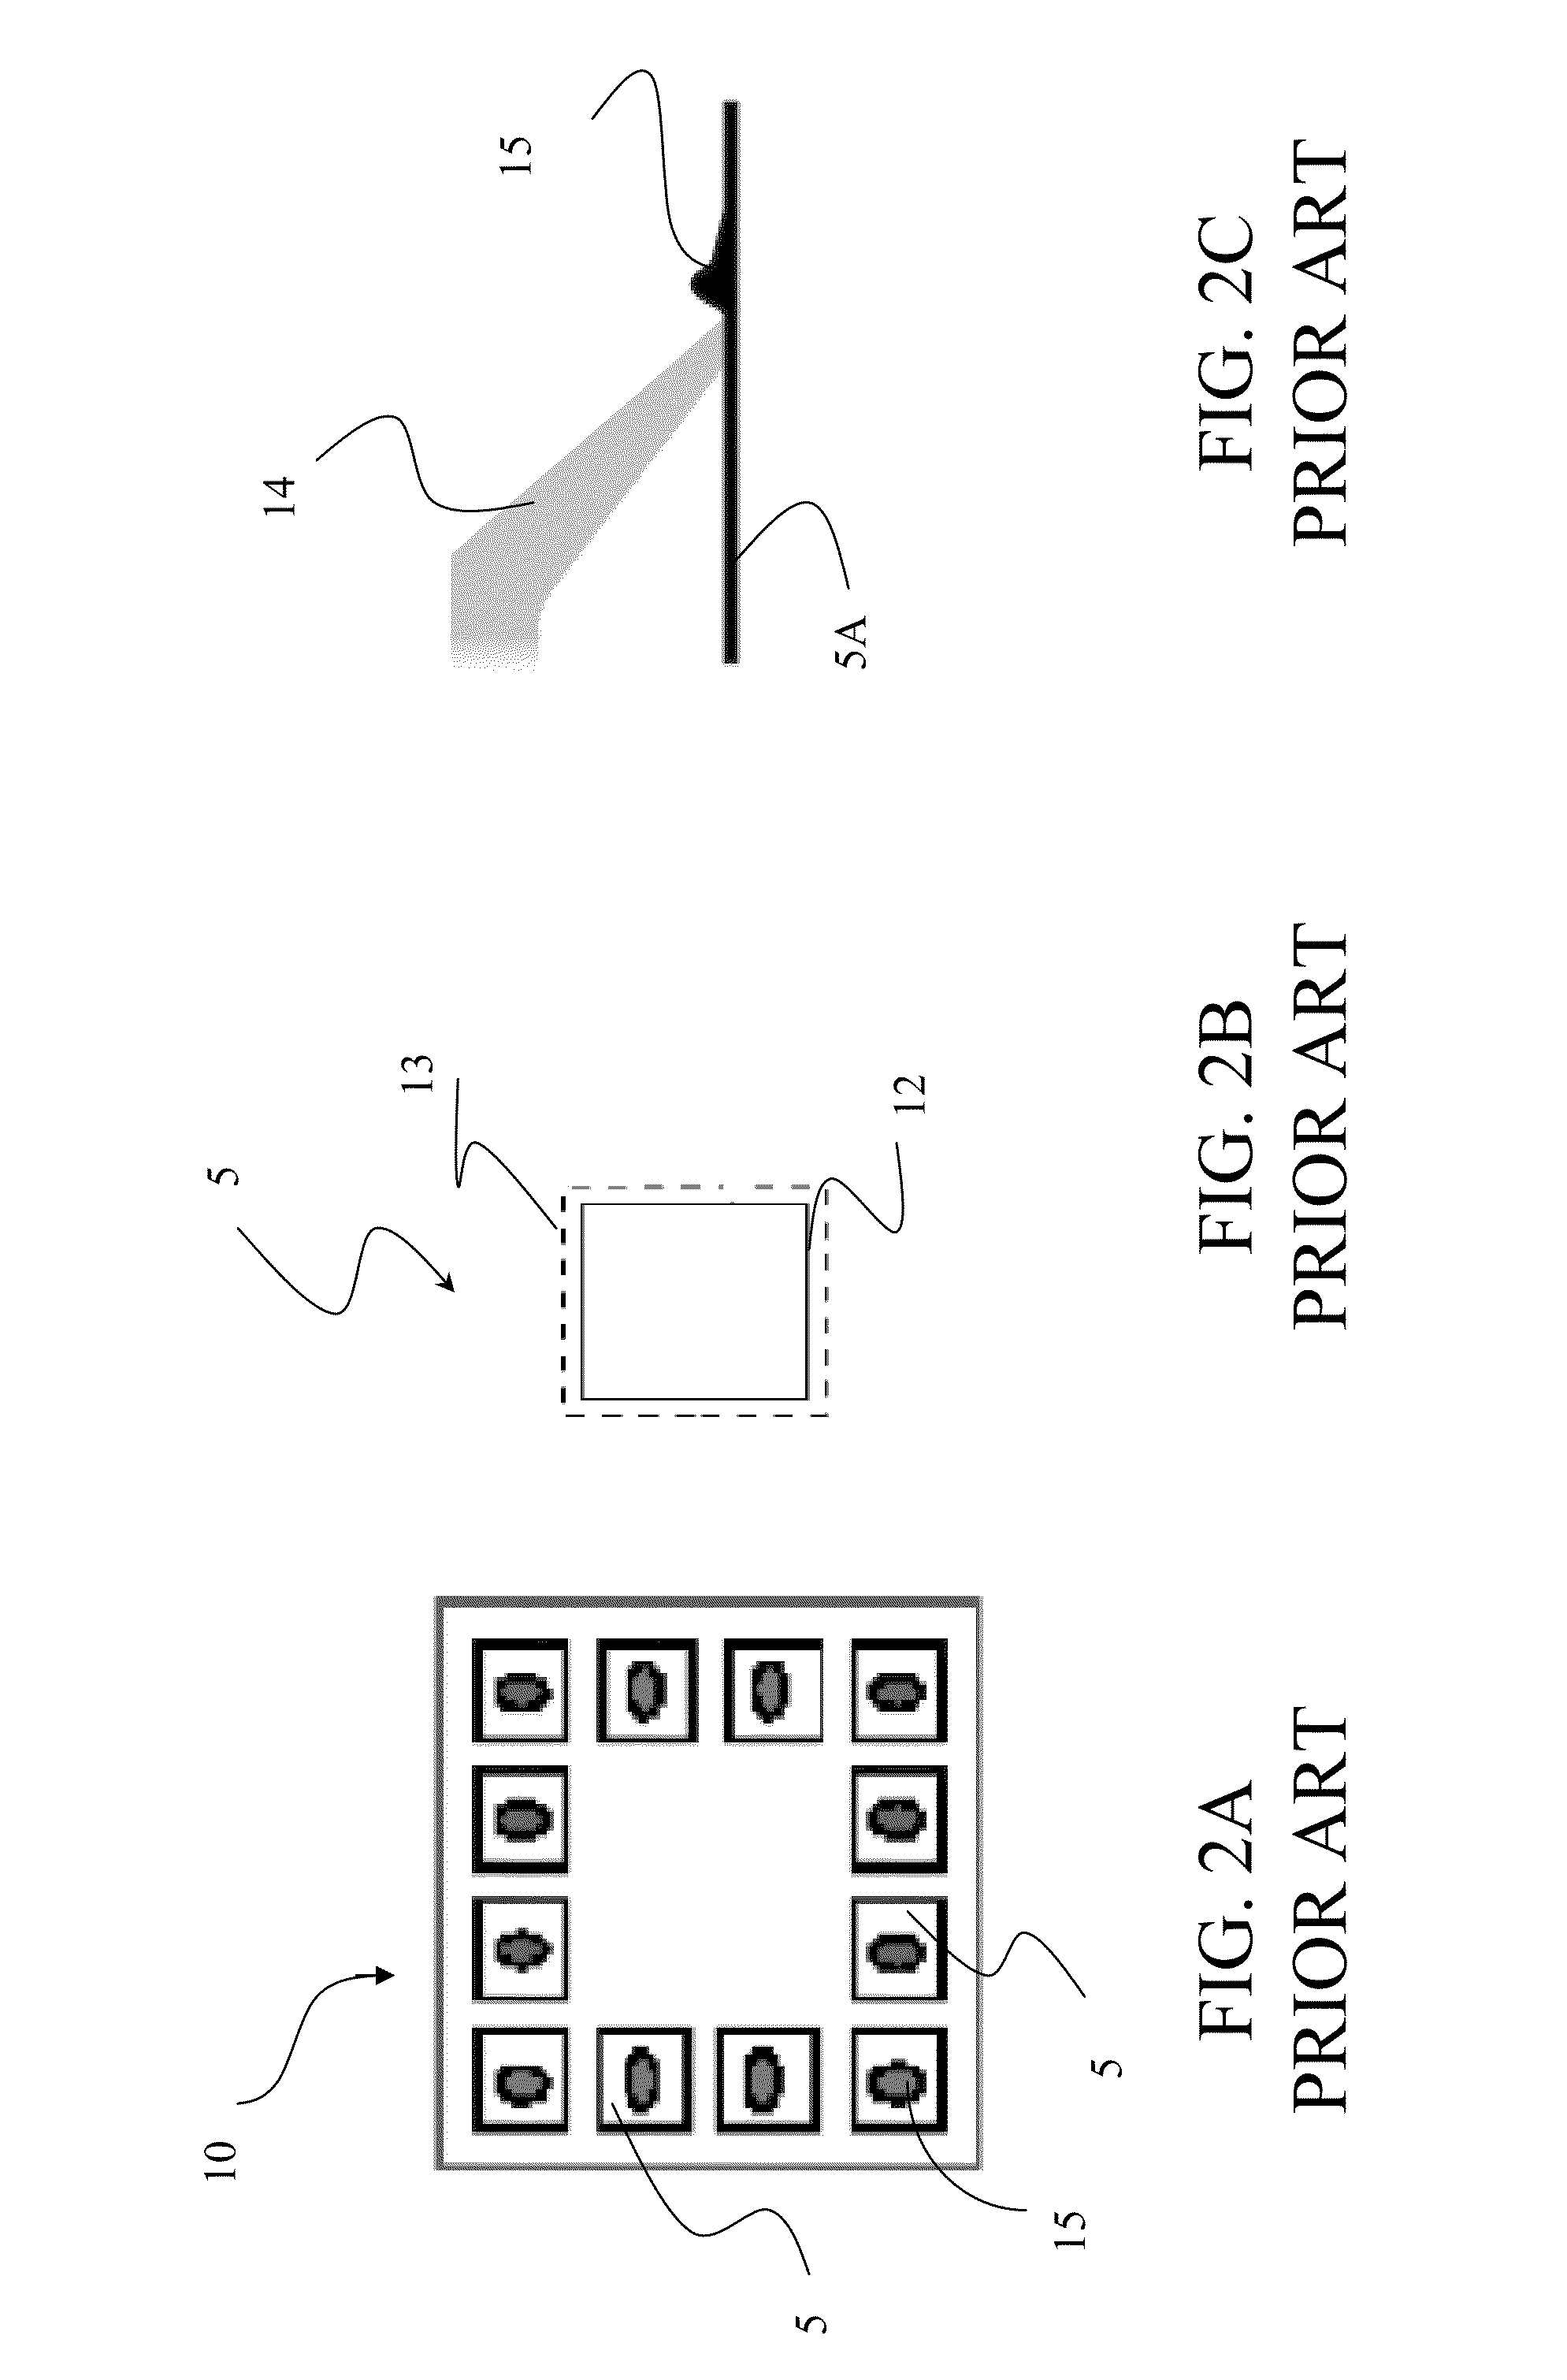 Method to perform electrical testing and assembly of electronic devices